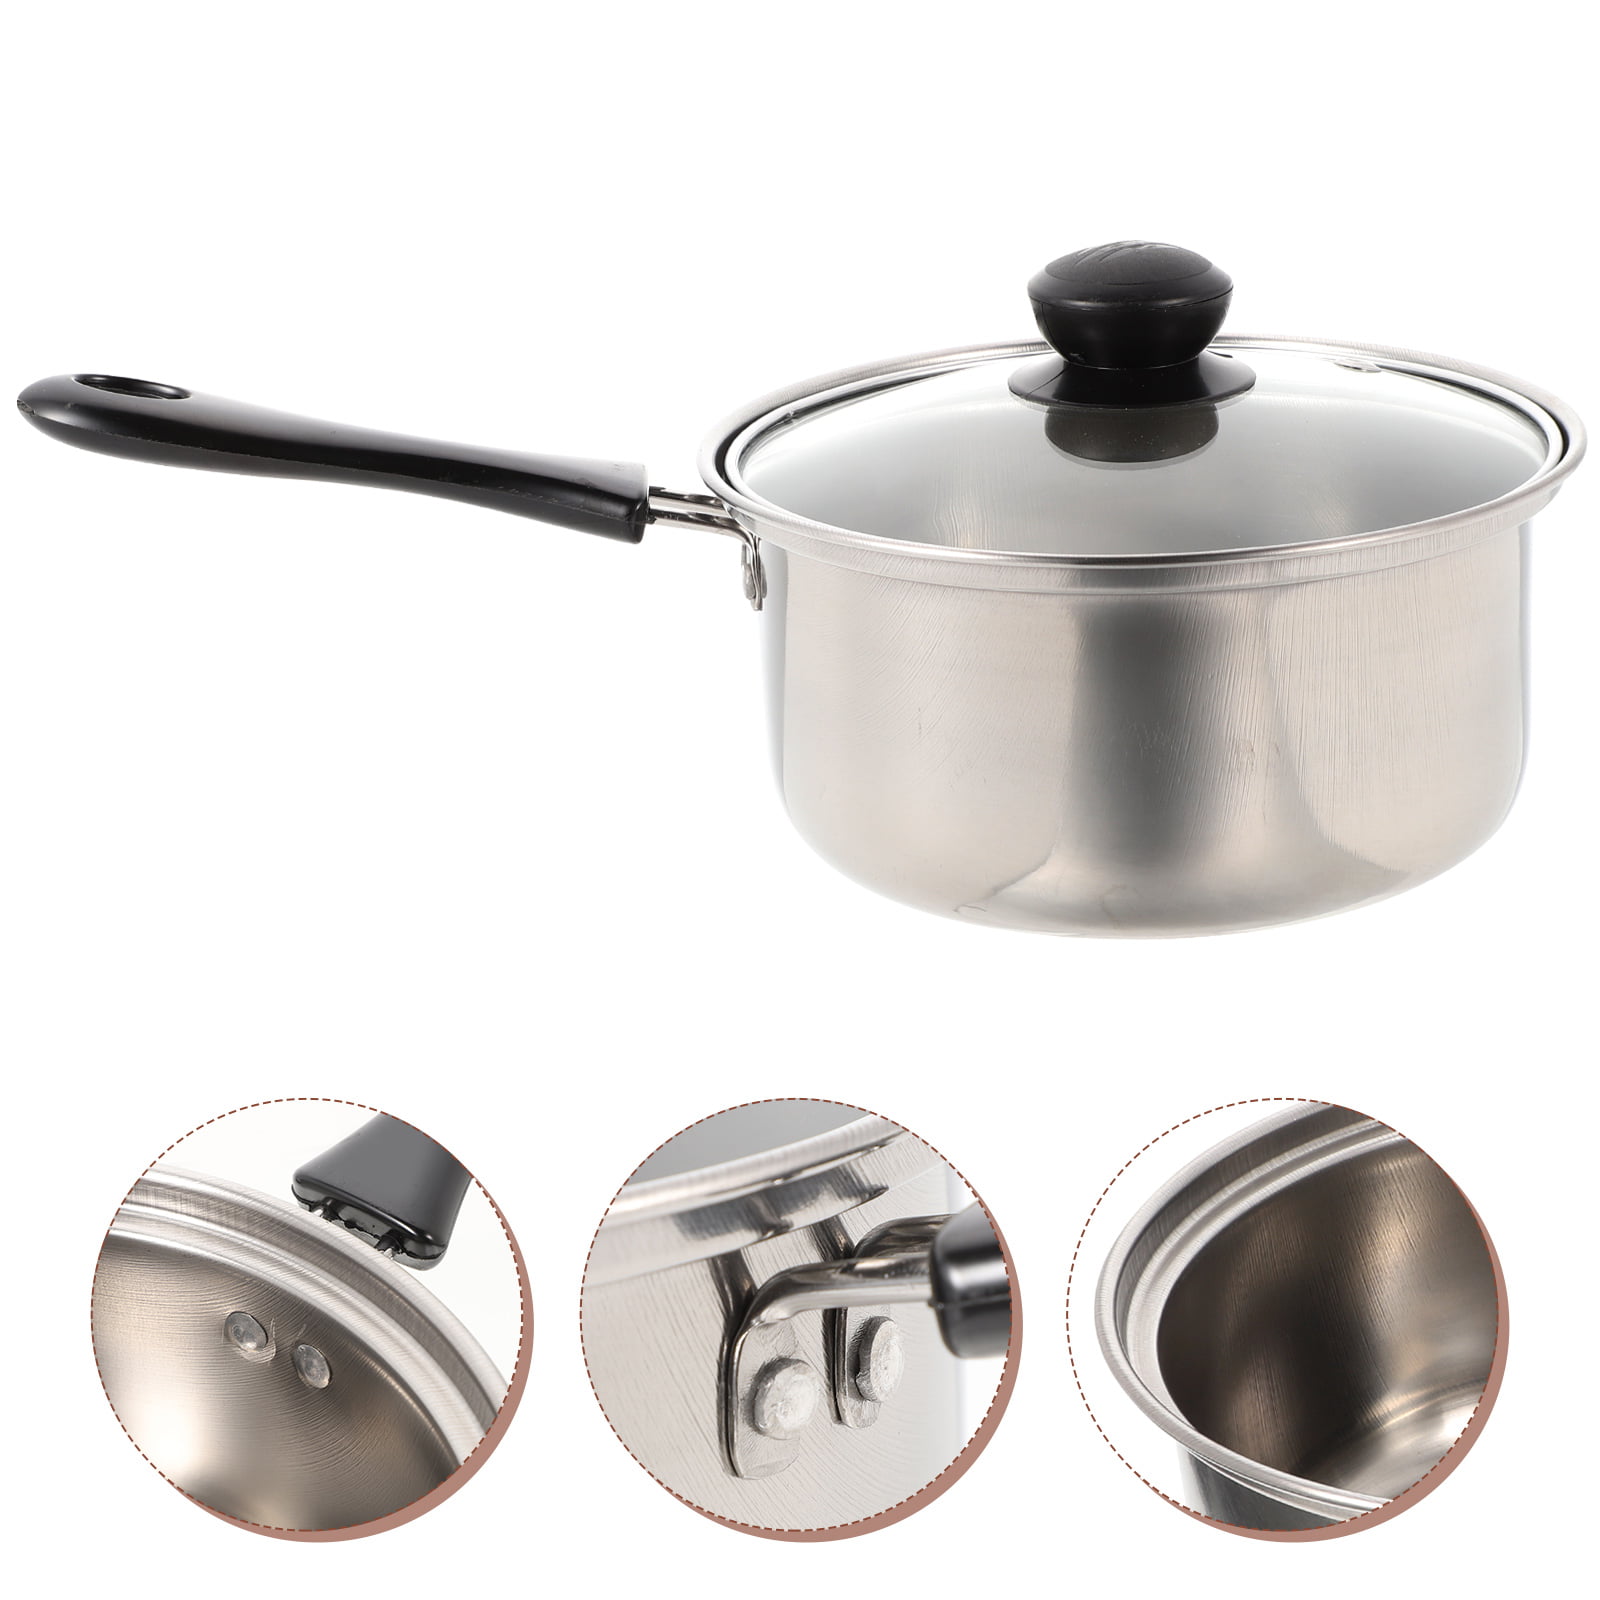 Veemoon 1pc Stainless Steel Milk Pot Stovetop Cooking Pot Small Soup Pot  Noodle Non Stick Stock Pot Pan Stew Cooker Kitchen Cooking Pot Soup Pots  Baby